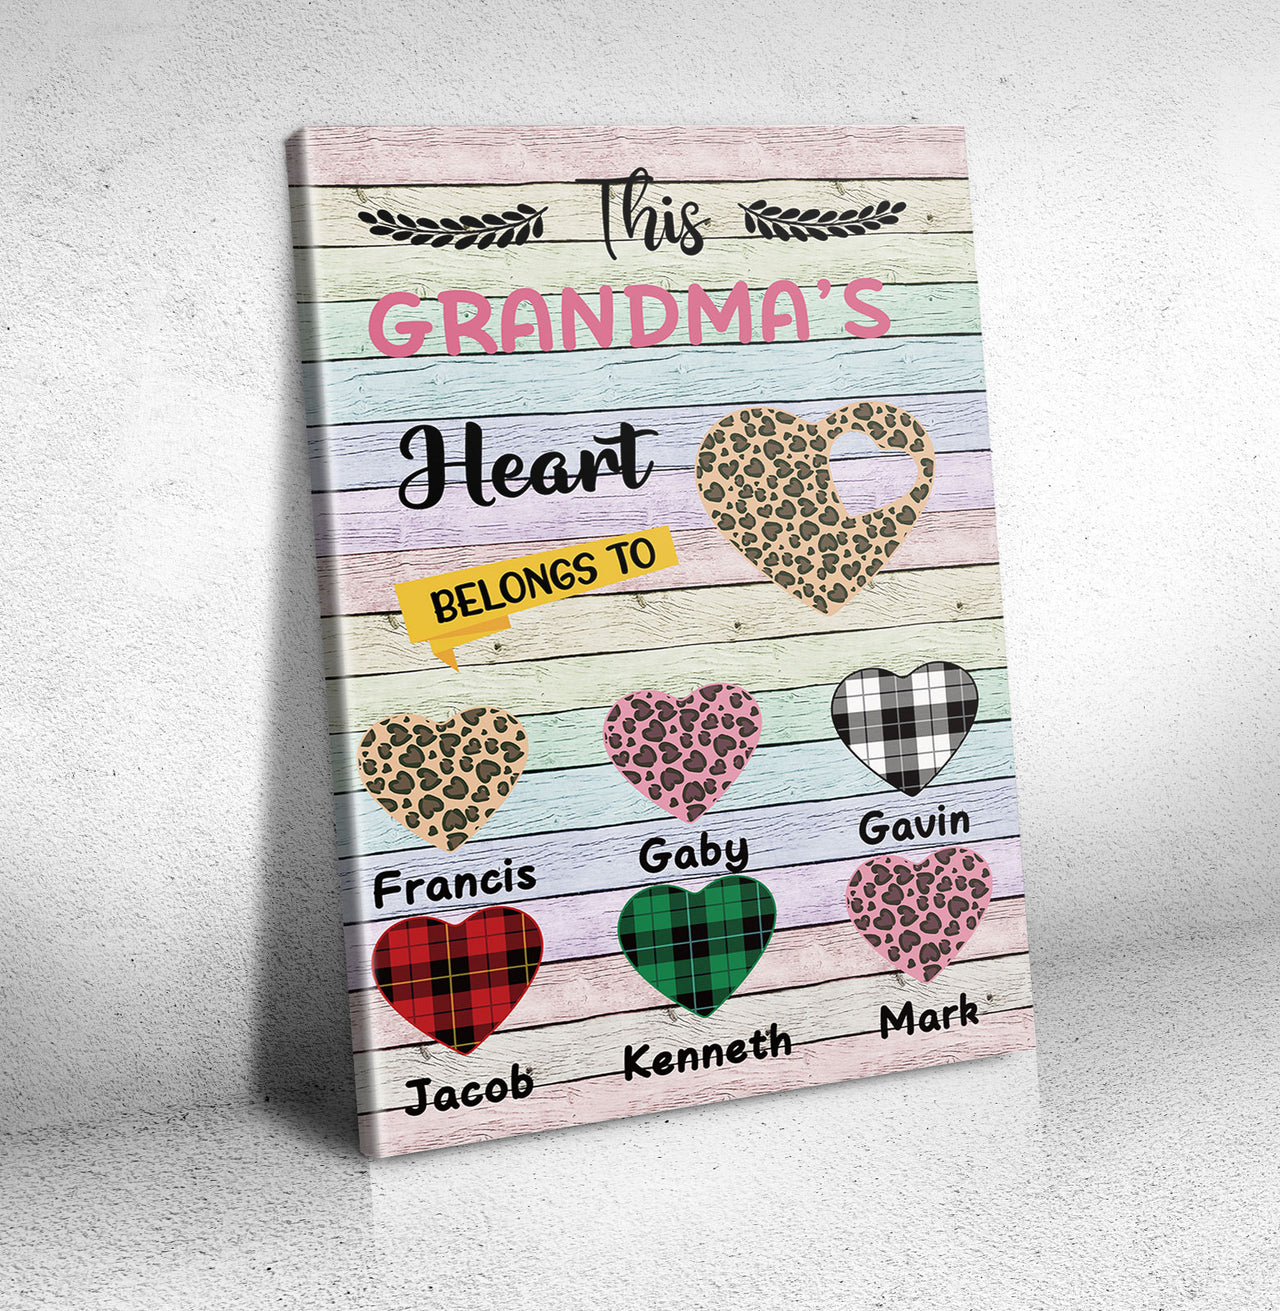 This Grandma's Heart Belongs To Personalized Canvas, Family Gift For Grandma AK